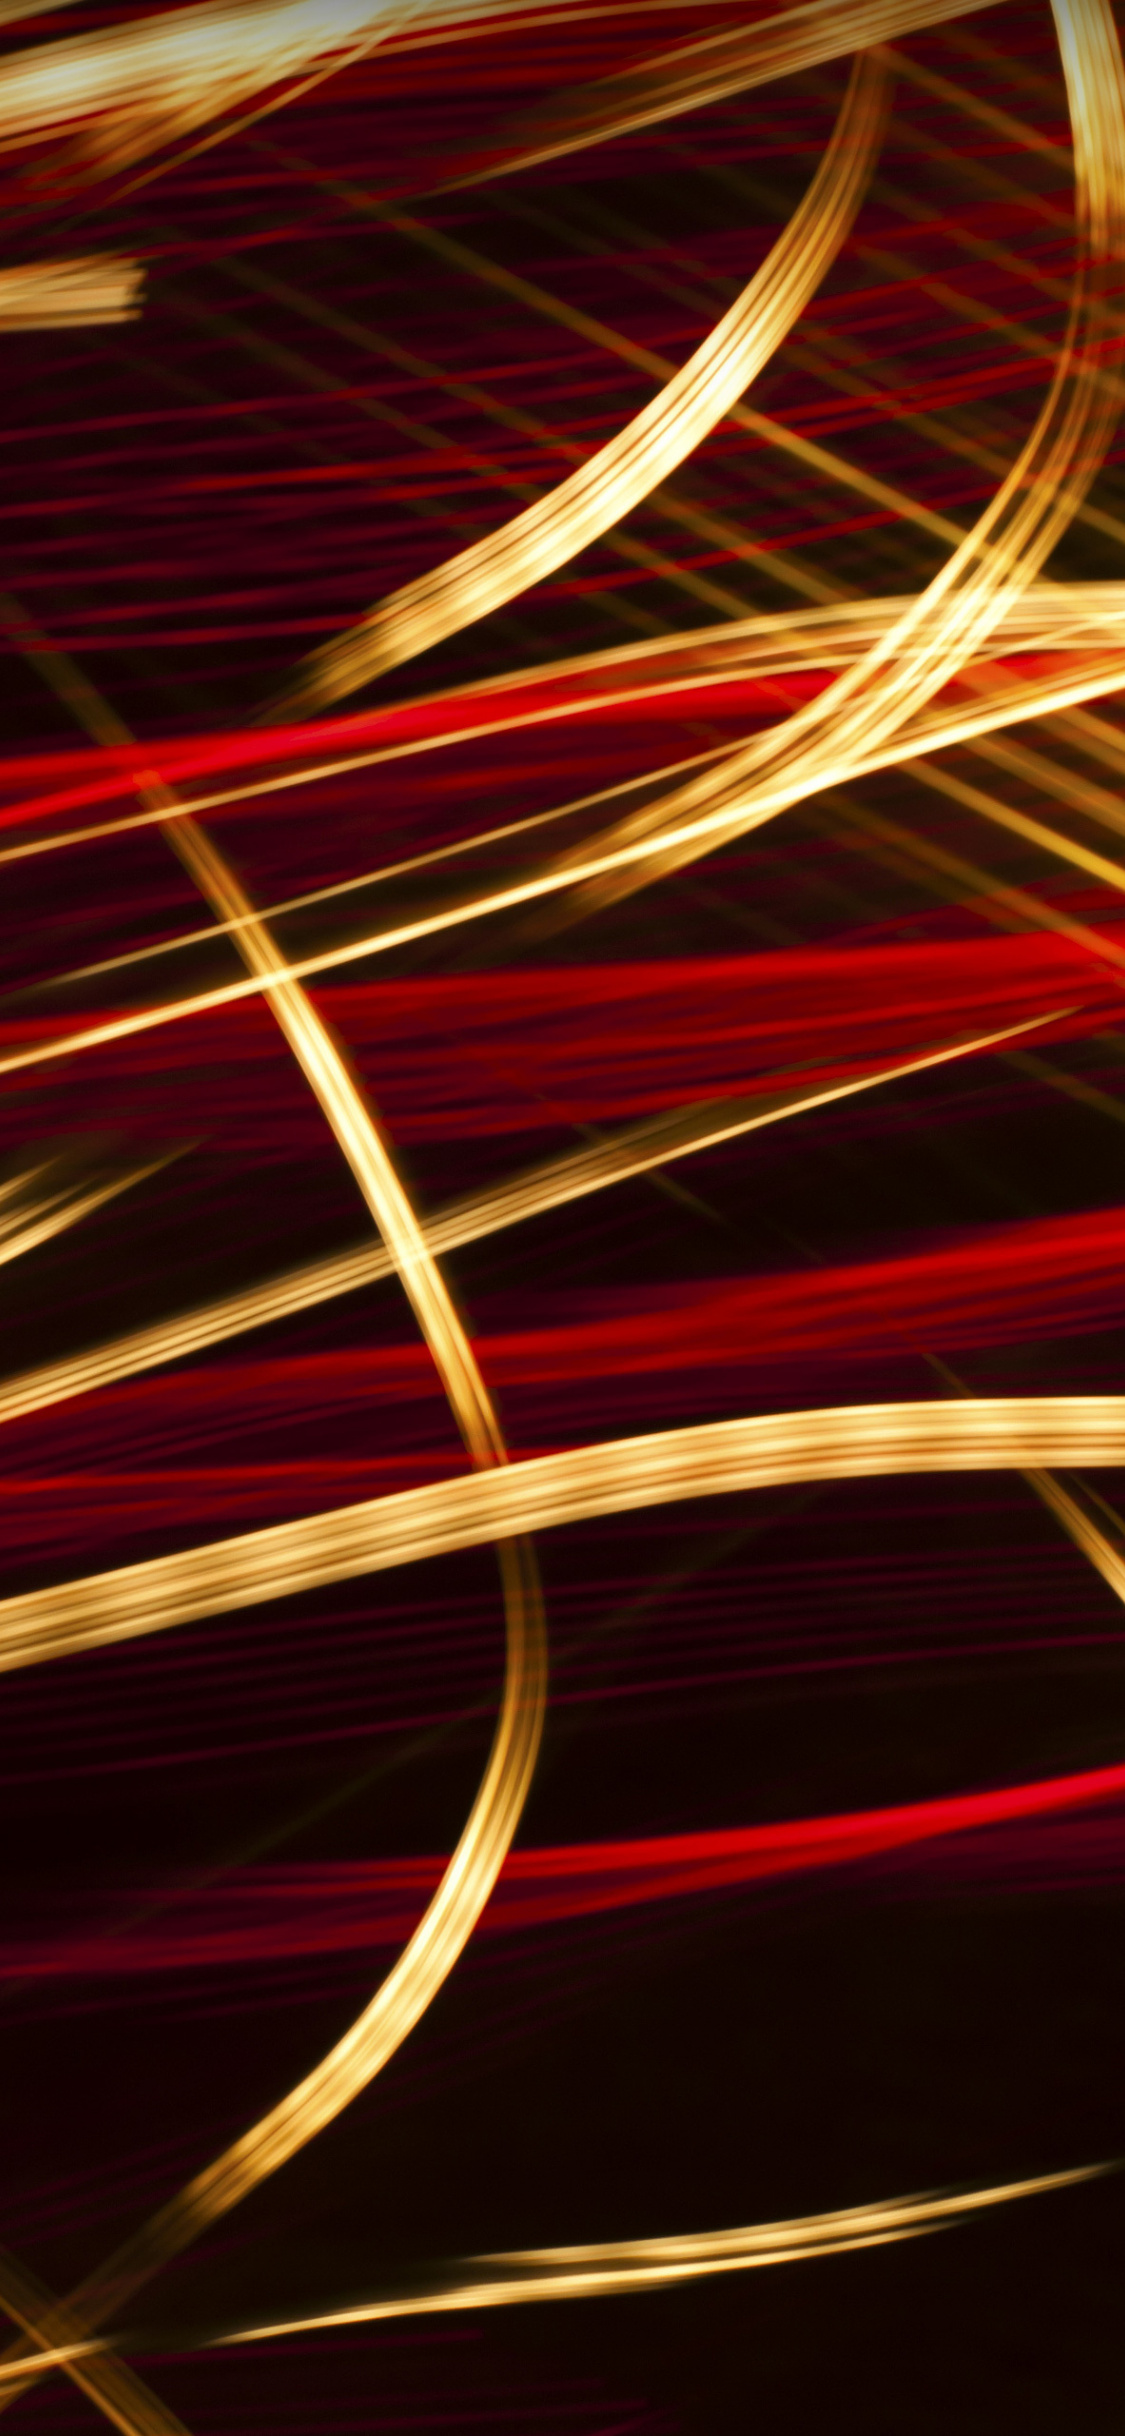 Waves, Golden Red Stripes, Abstract, Wallpaper - Iphone Red And Gold - HD Wallpaper 